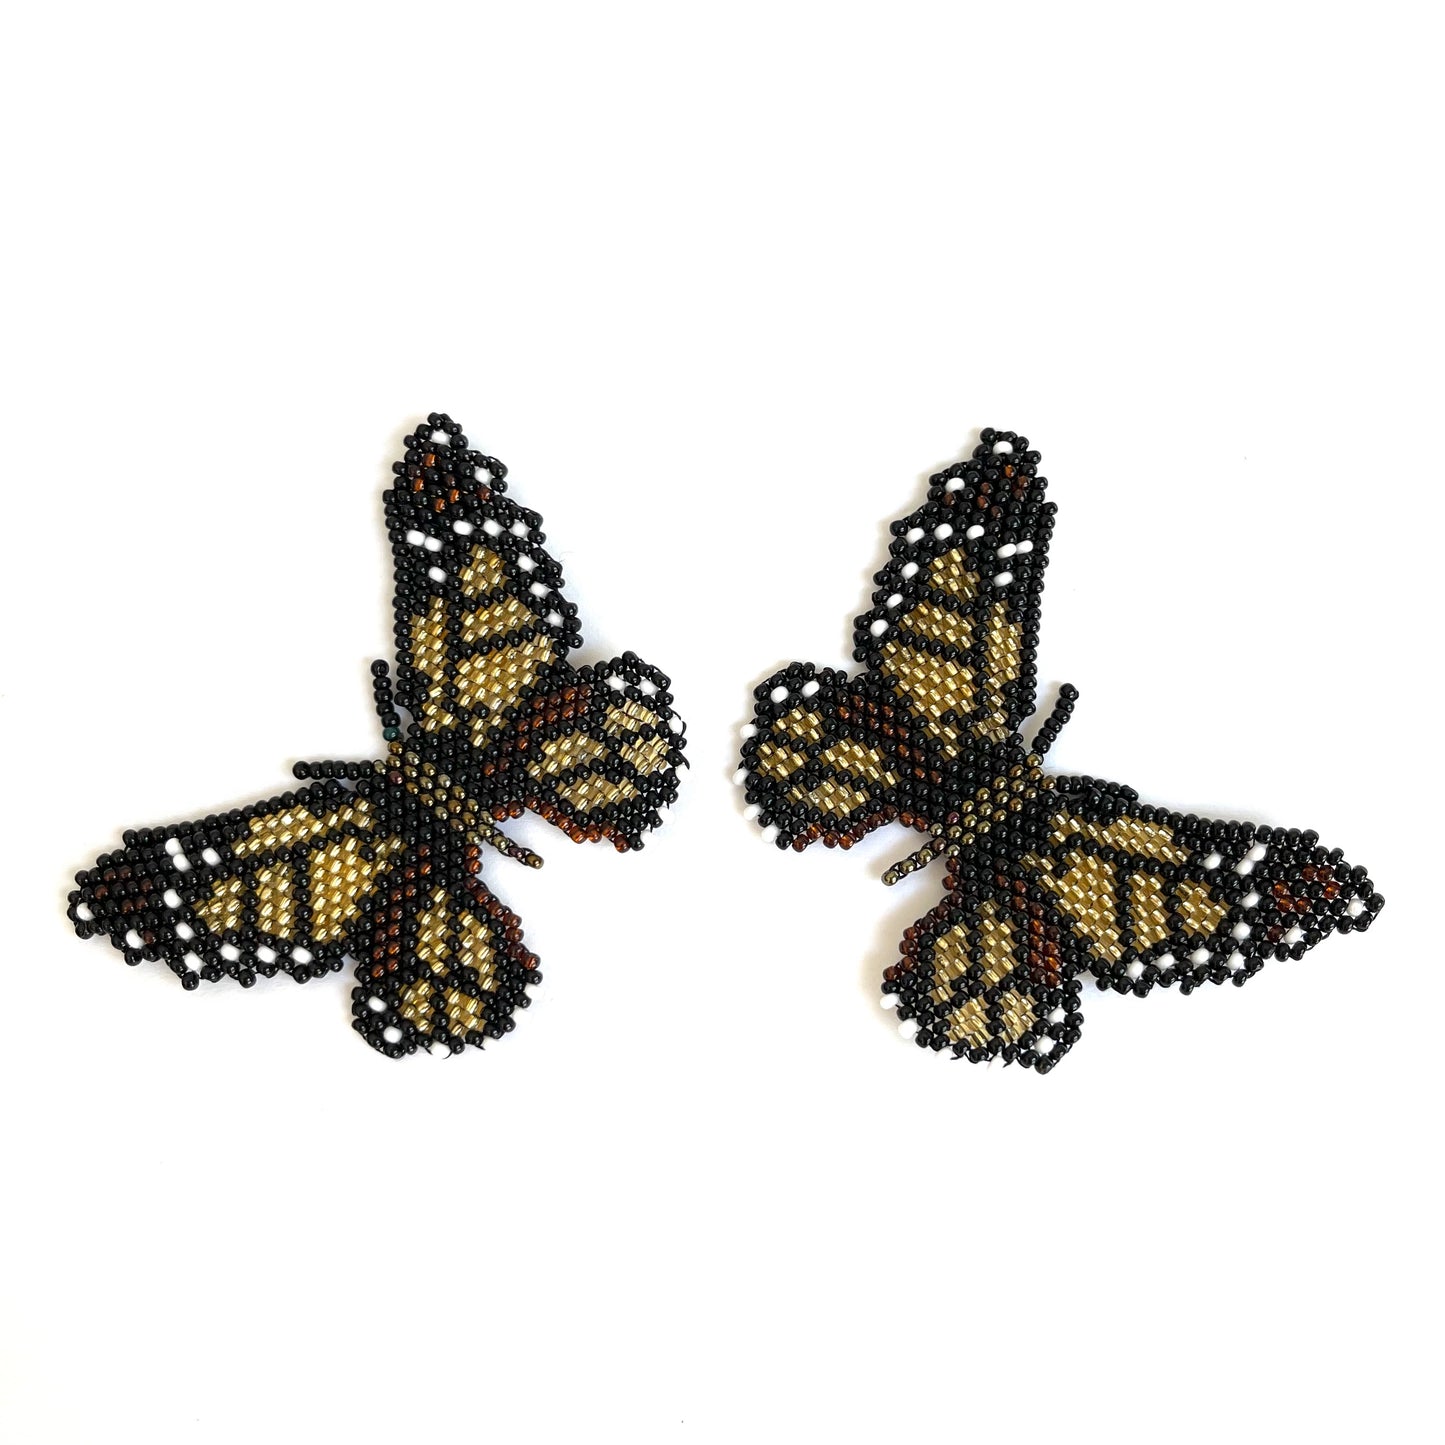 06. Gold and black butterfly earrings